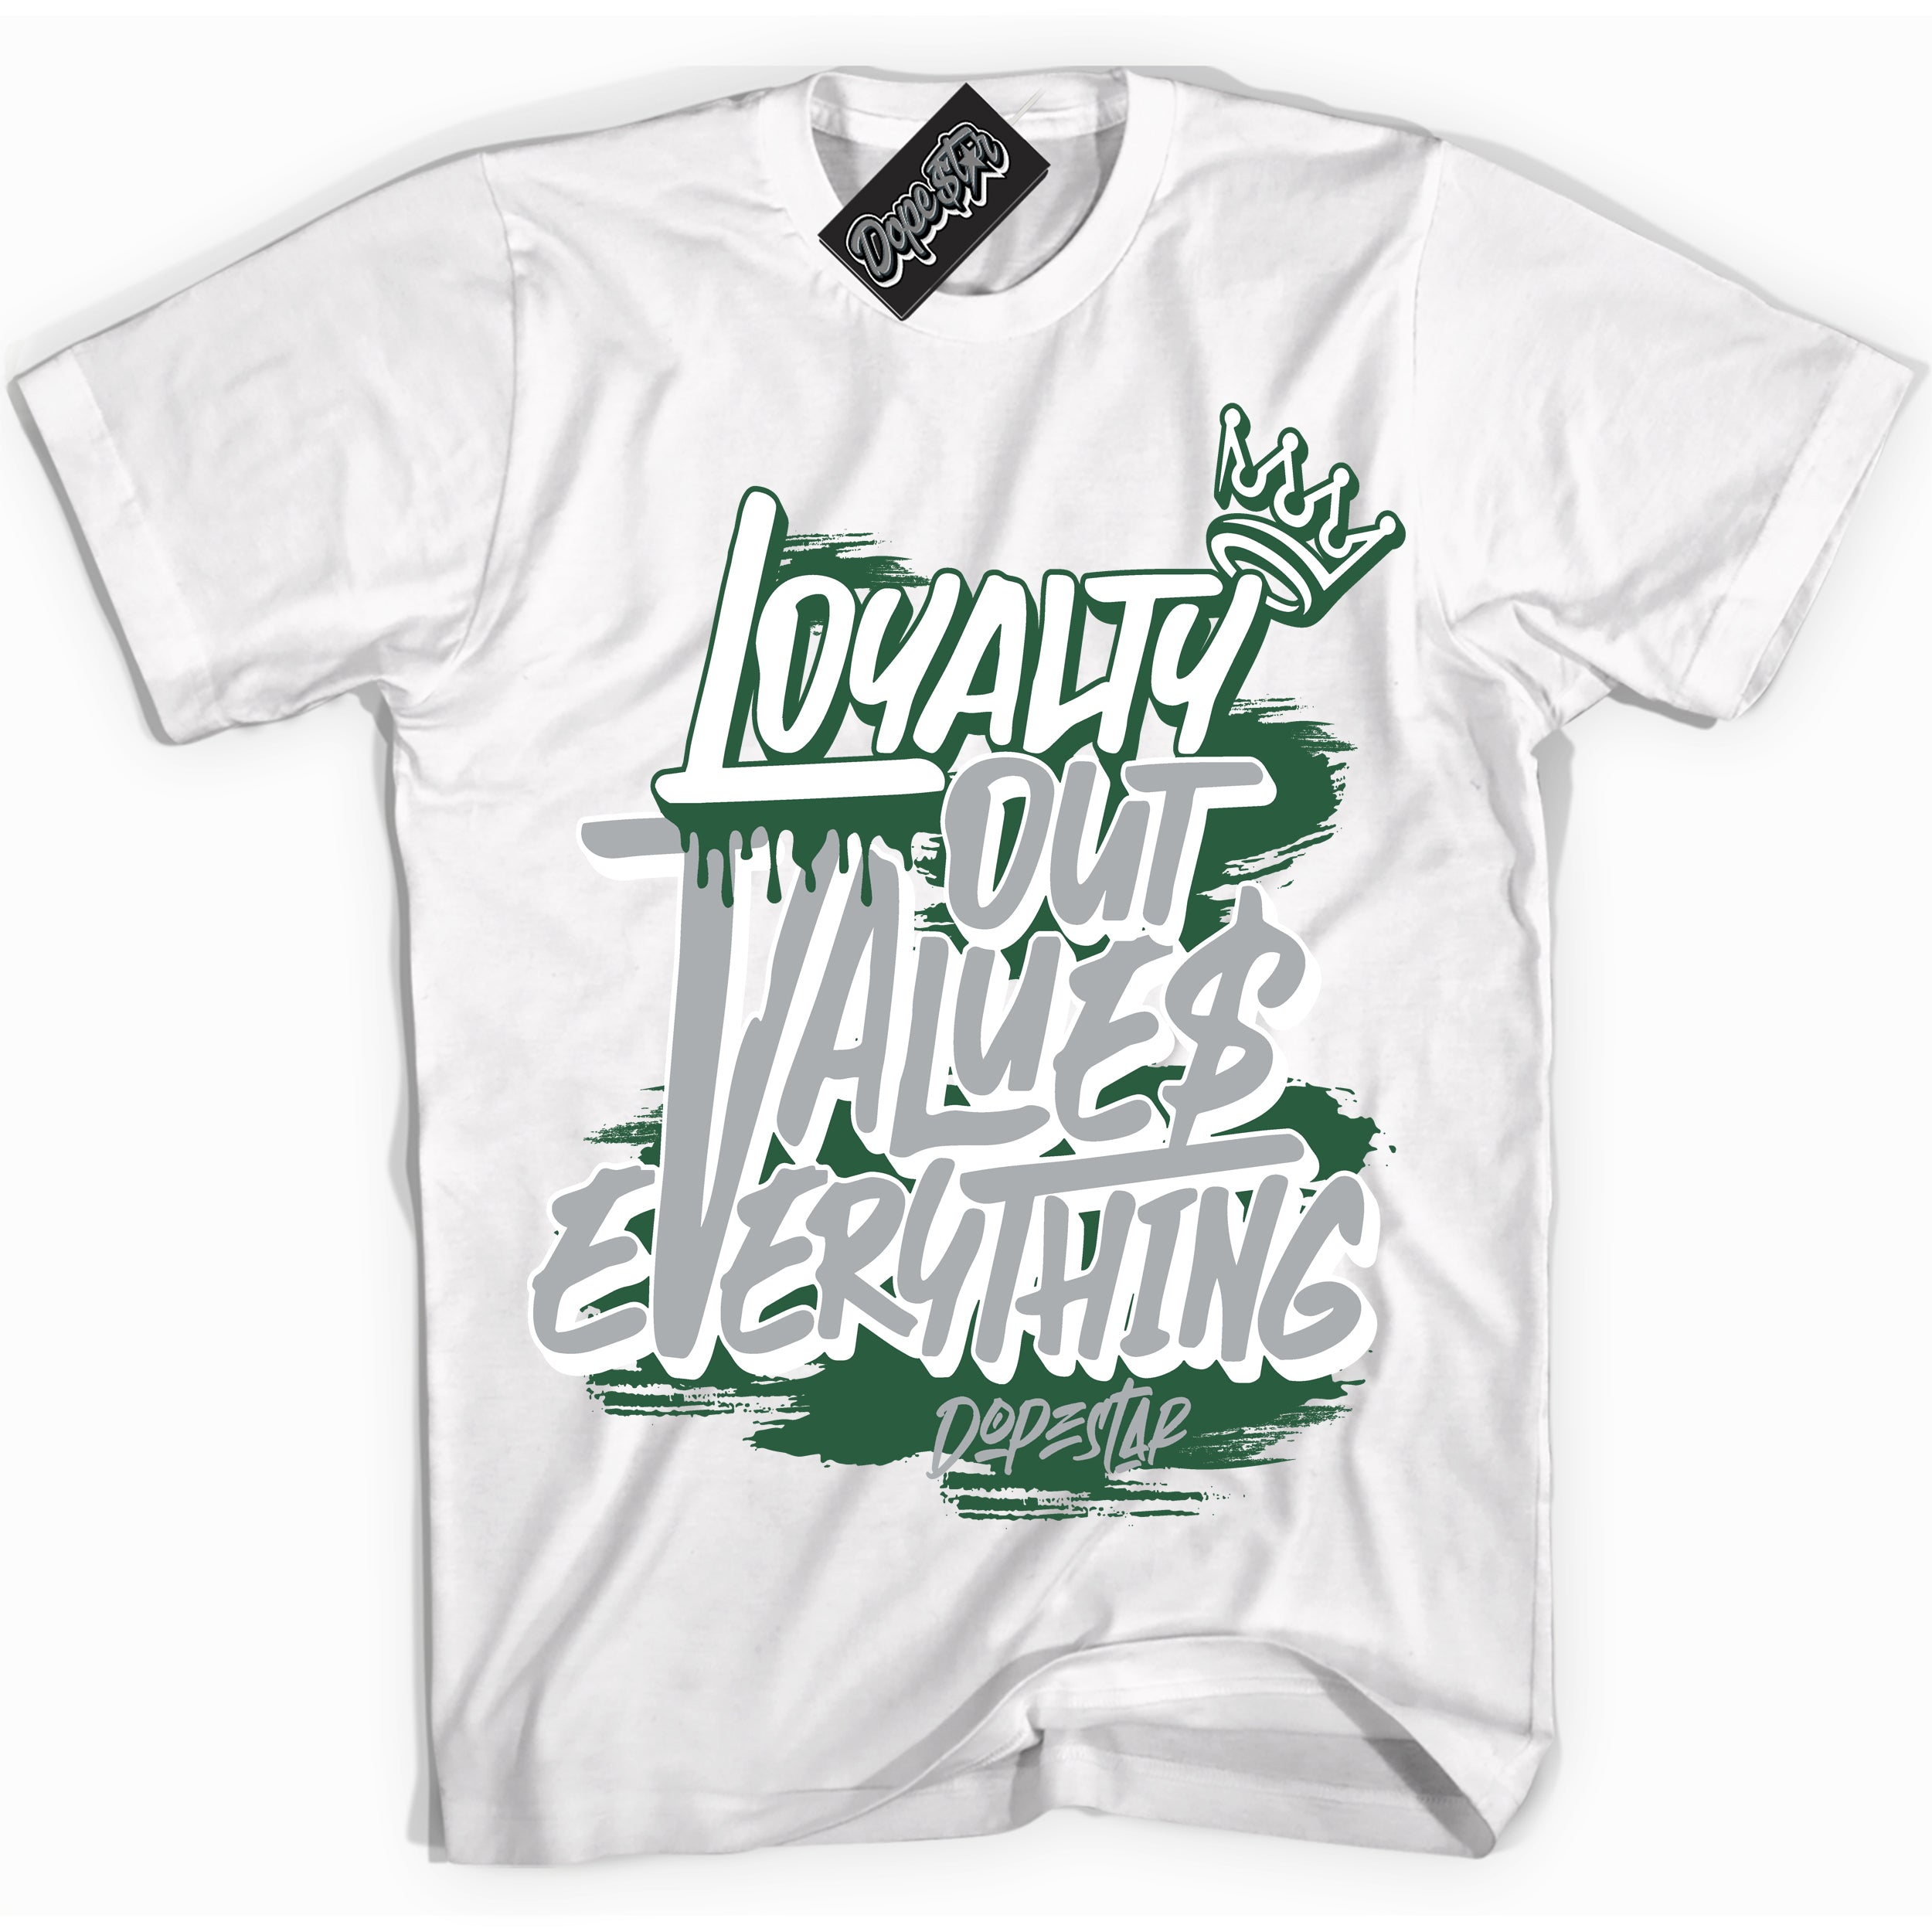 Cool White Shirt with “ Loyalty Out Values Everything” design that perfectly matches Gorge Green 1s Sneakers.